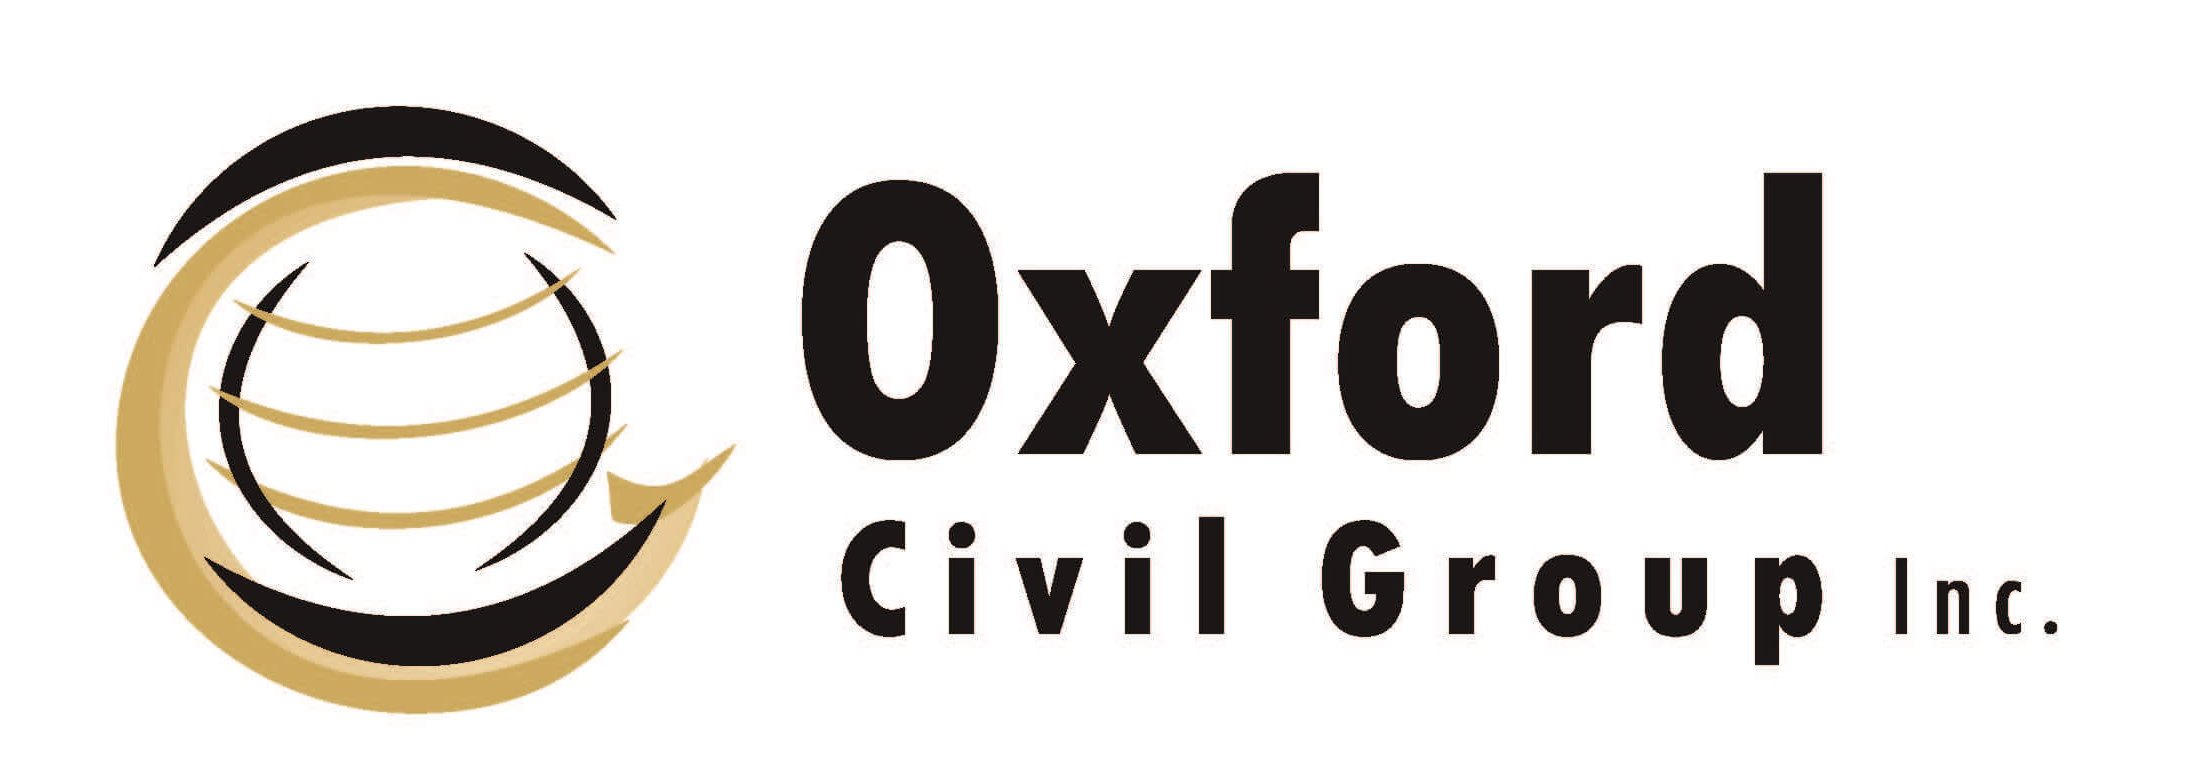 Oxford Civll Group logo - Big Brothers Big Sisters of Oxford County